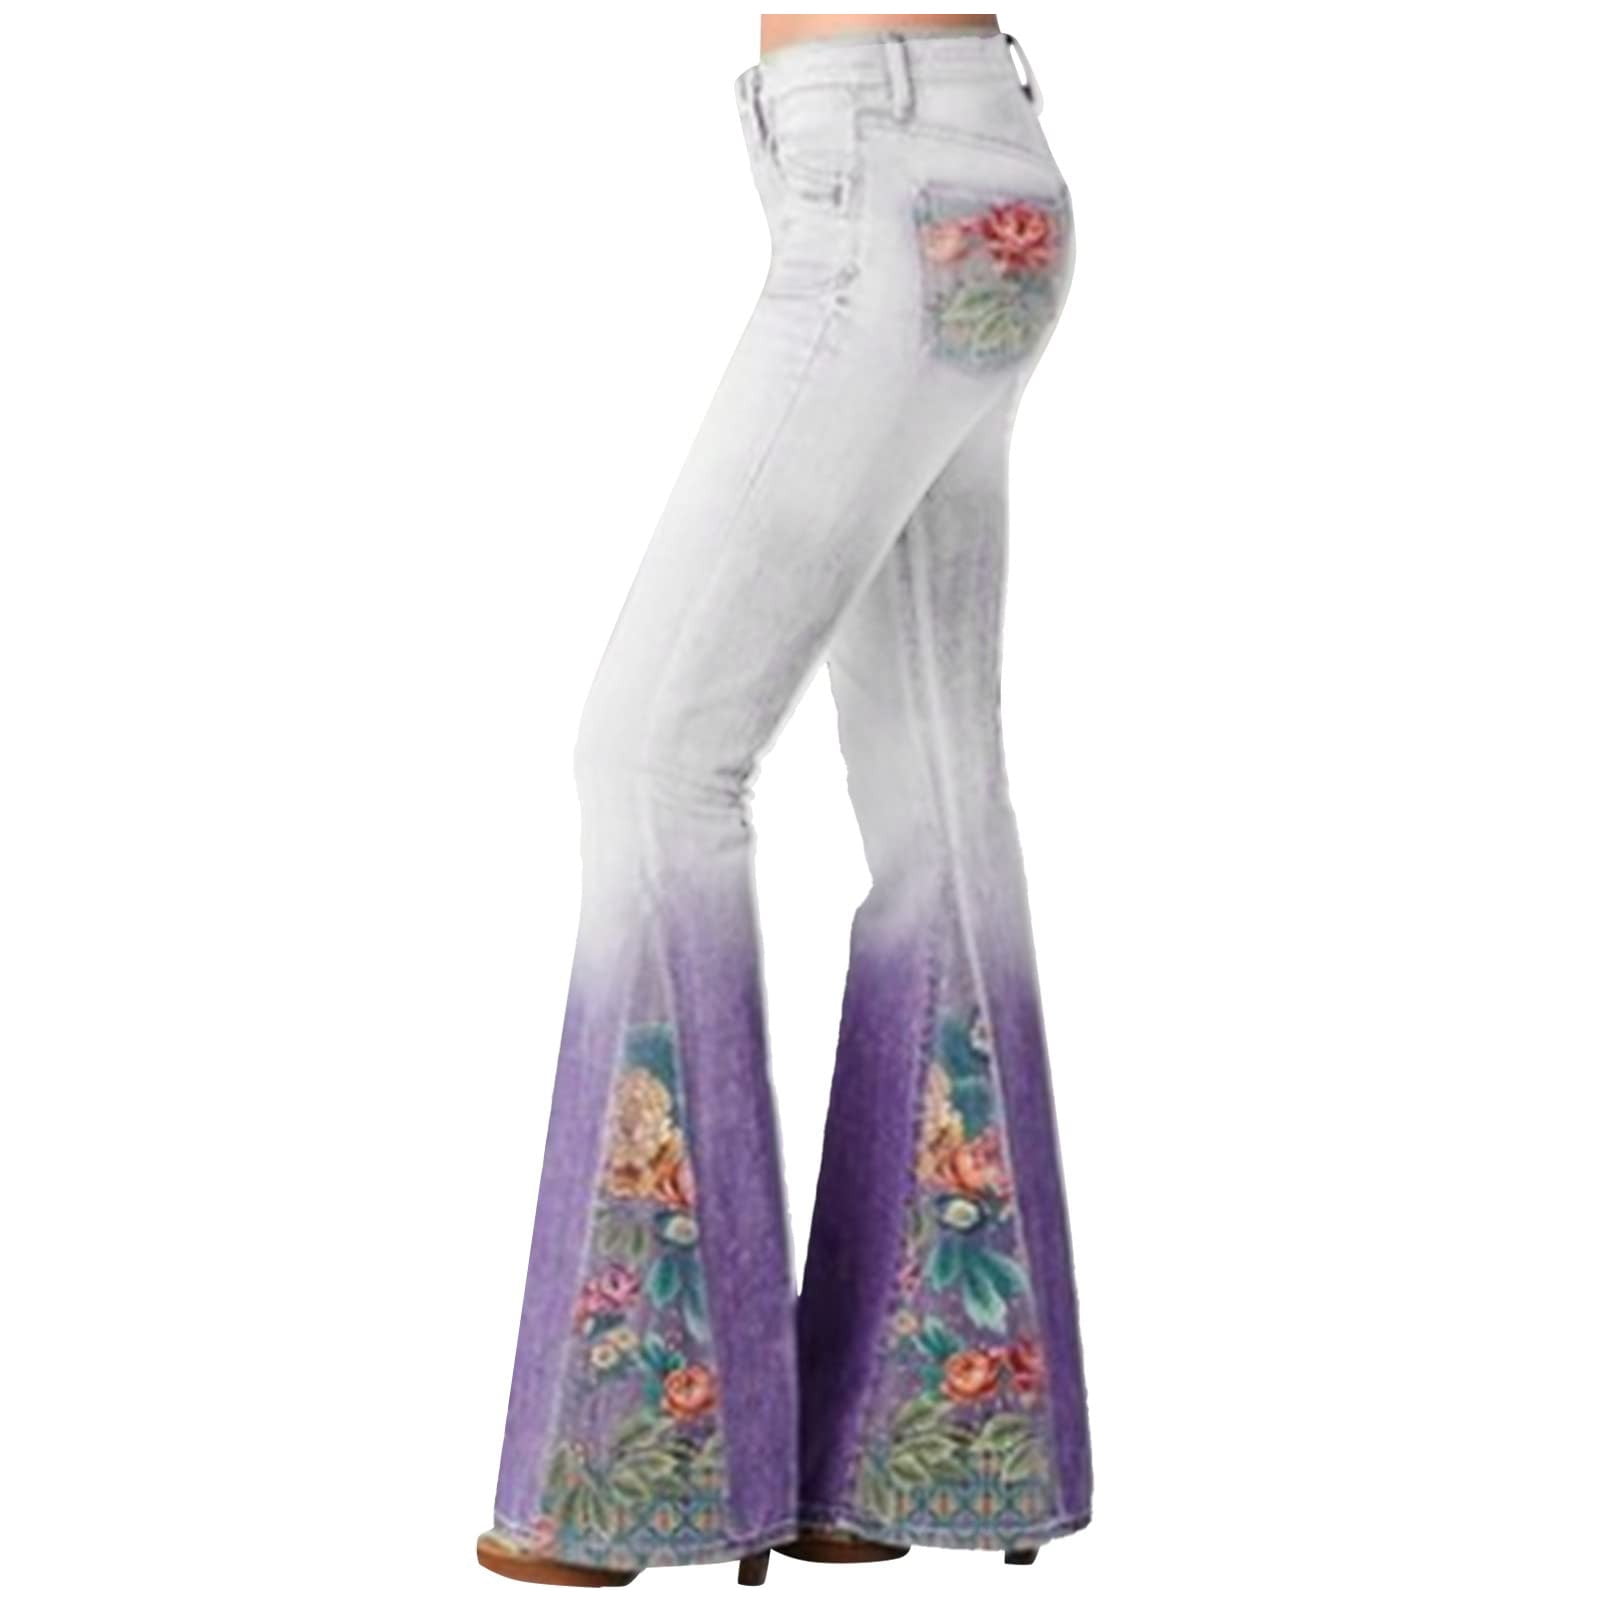 YYDGH Womens Floral Lace Flare Jeans High Waisted Stretch Bell Bottom Jeans  Boho Bootcut Jean Denim Palazzo Pants Purple XL